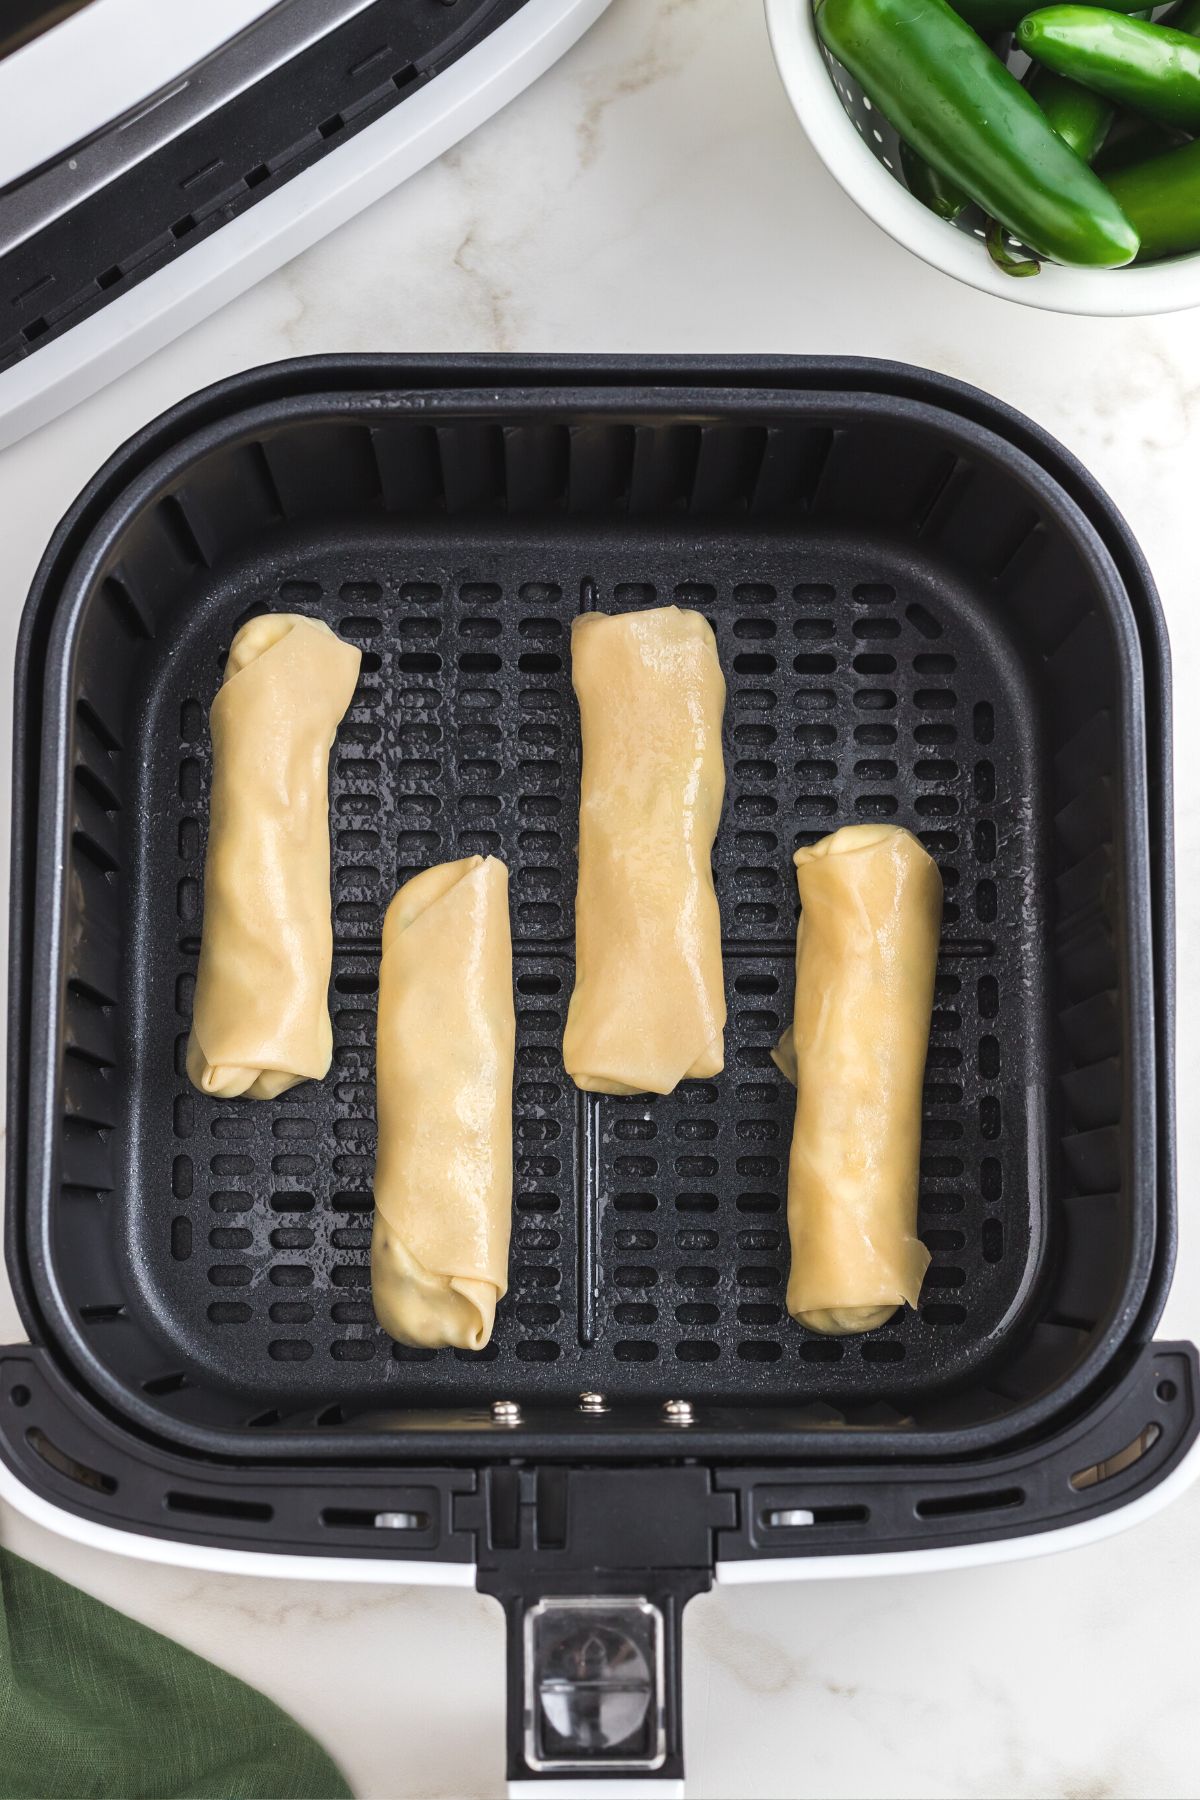 Rolled and filled wonton wrappers in the air fryer basket before being cooked